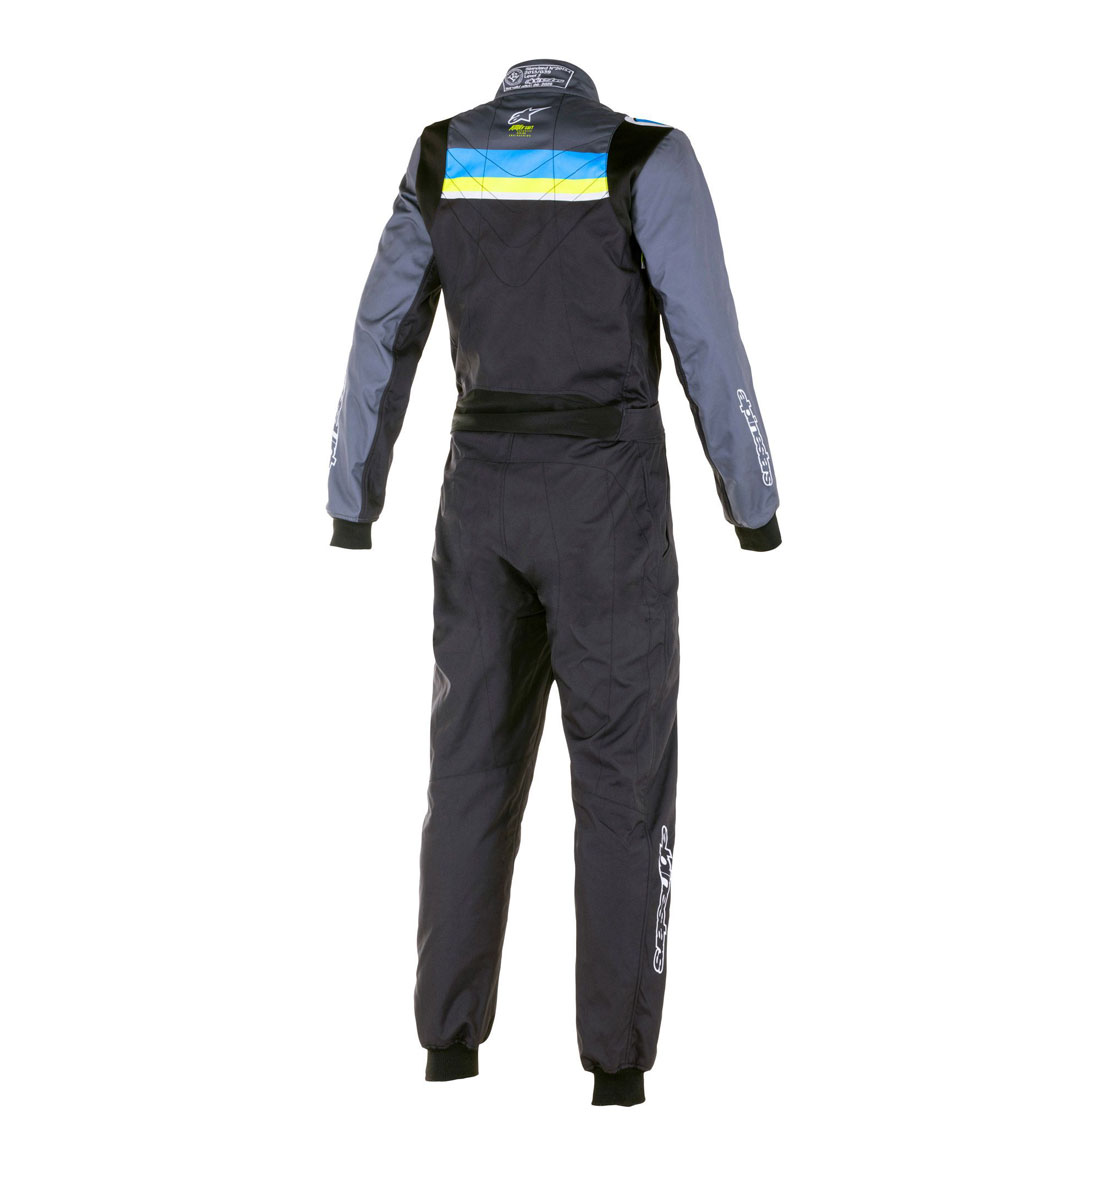 Alpinestars KMX-9 v2 Youth GRAPHIC  Suit - Black/Cyan/Yellow Fluo